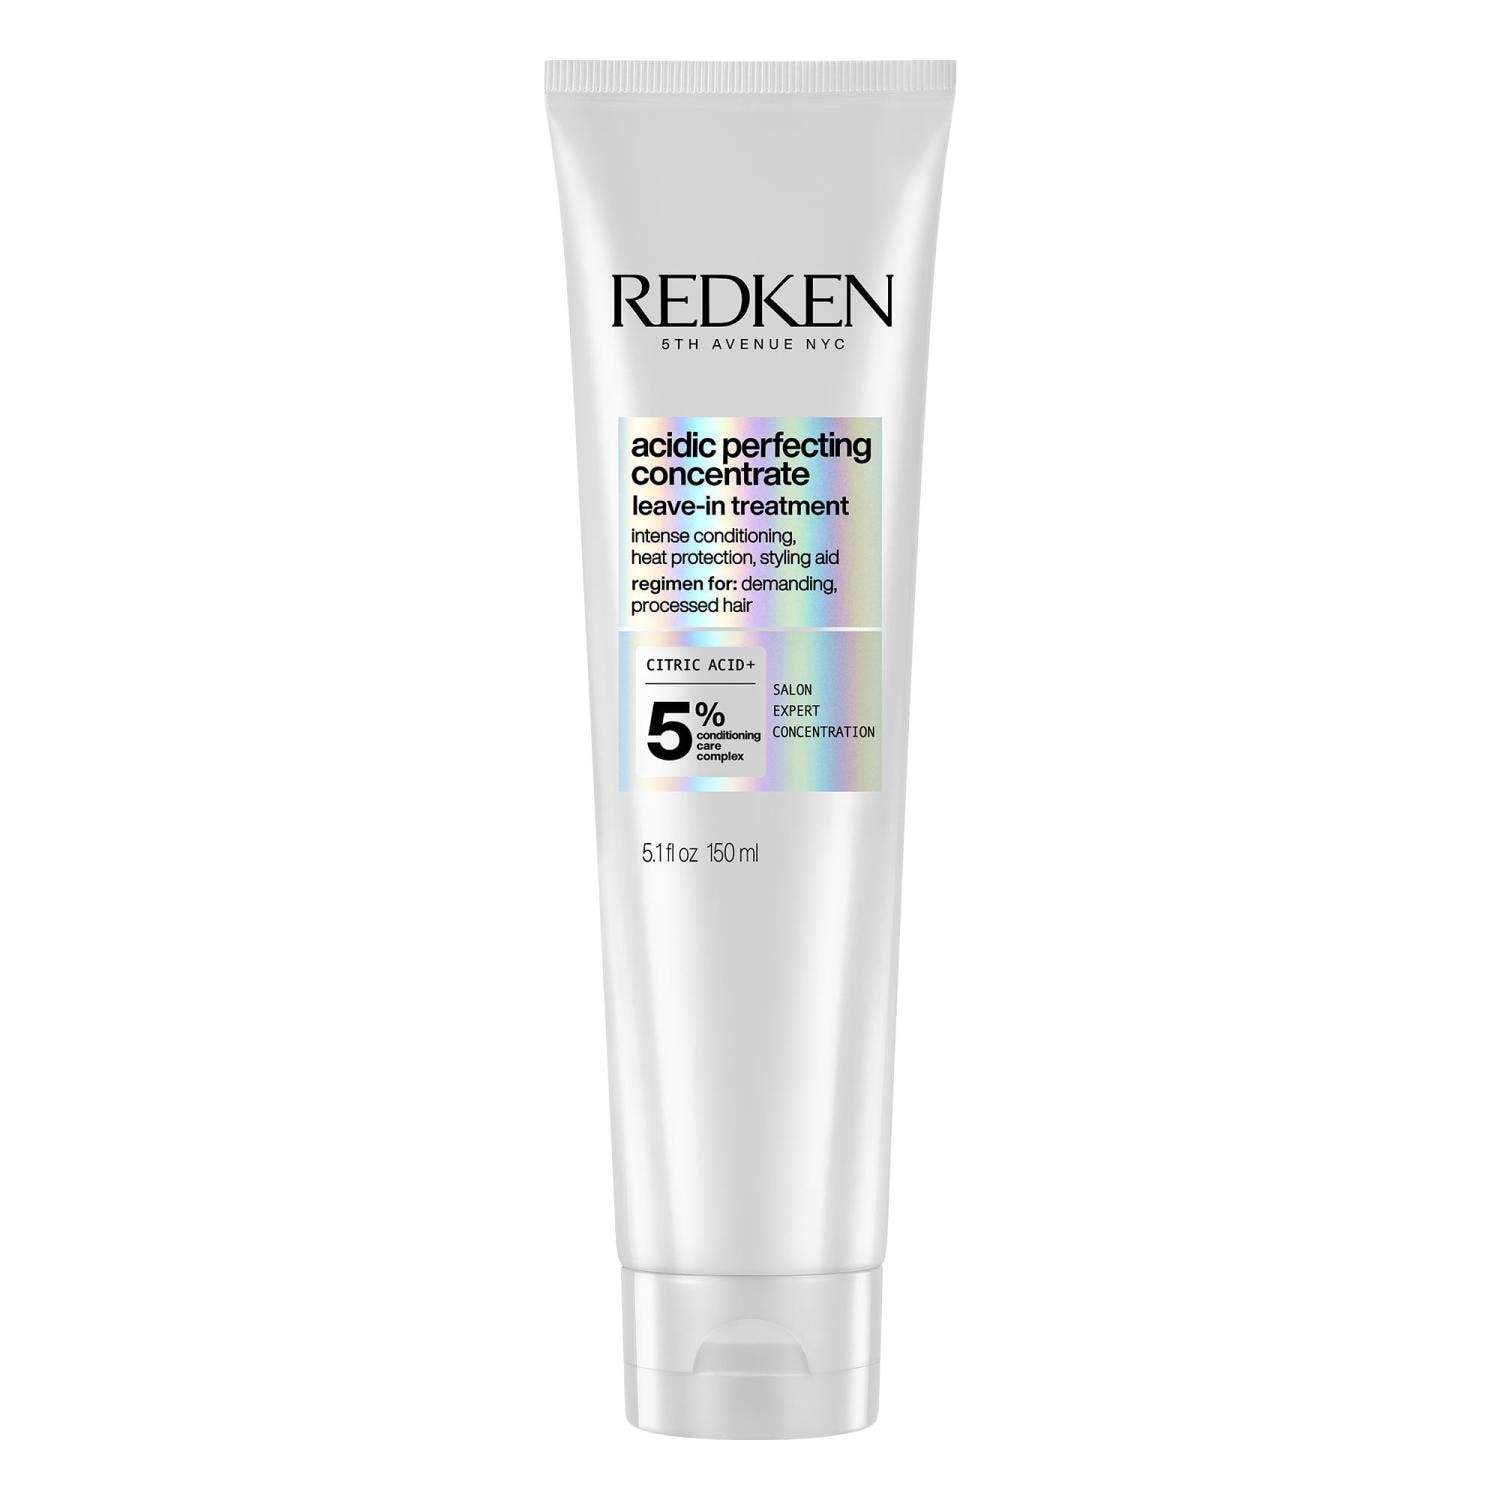 Redken Acidic Acid Perfecting Concentrate Leave-In Treatment